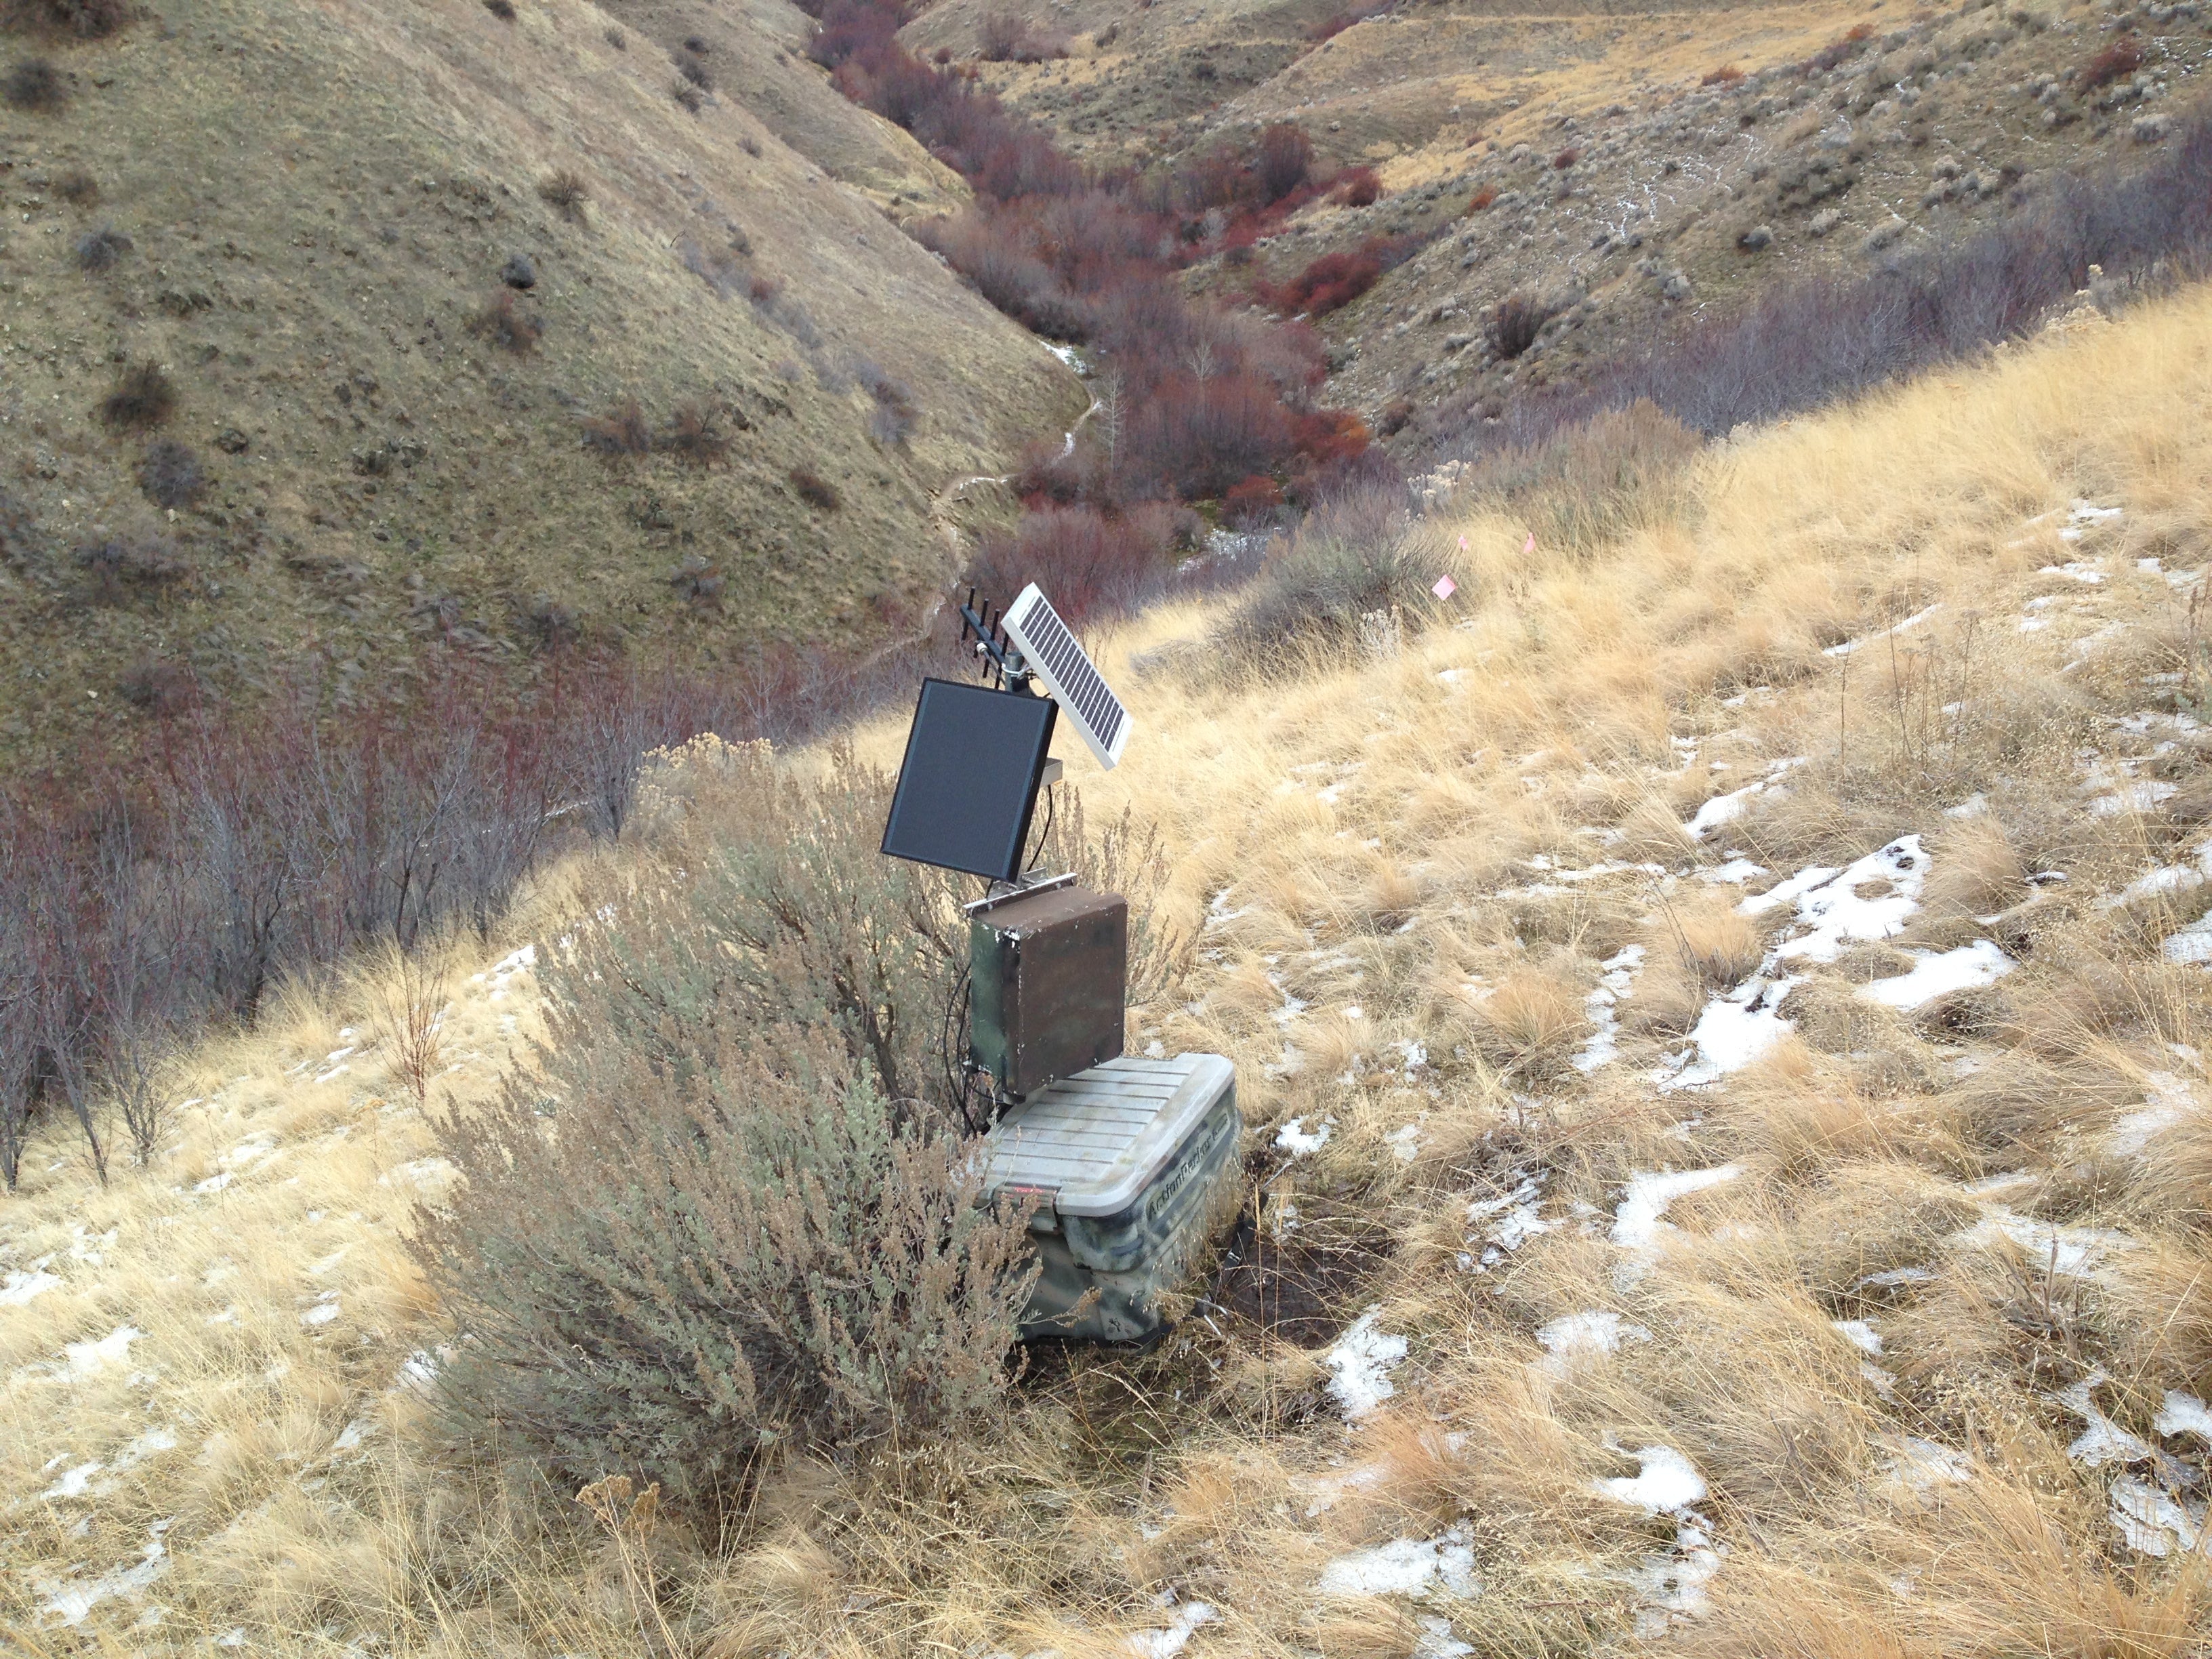 A measuring statiion sitting on the nortch face of the foothills with snow and bushes.